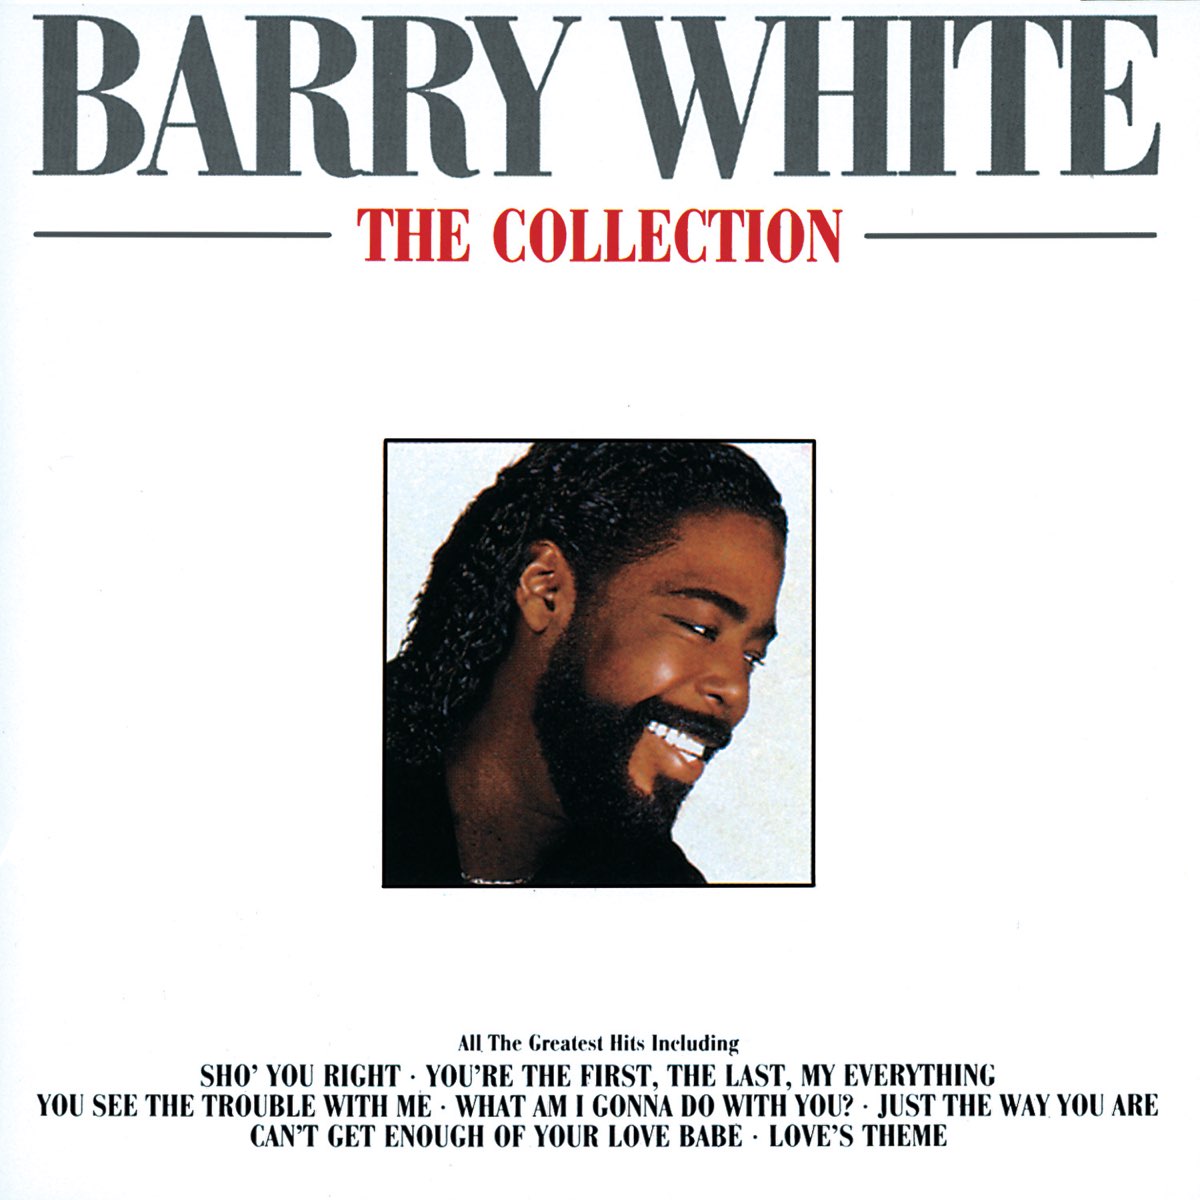 Barry White - The Collection by Barry White on Apple Music